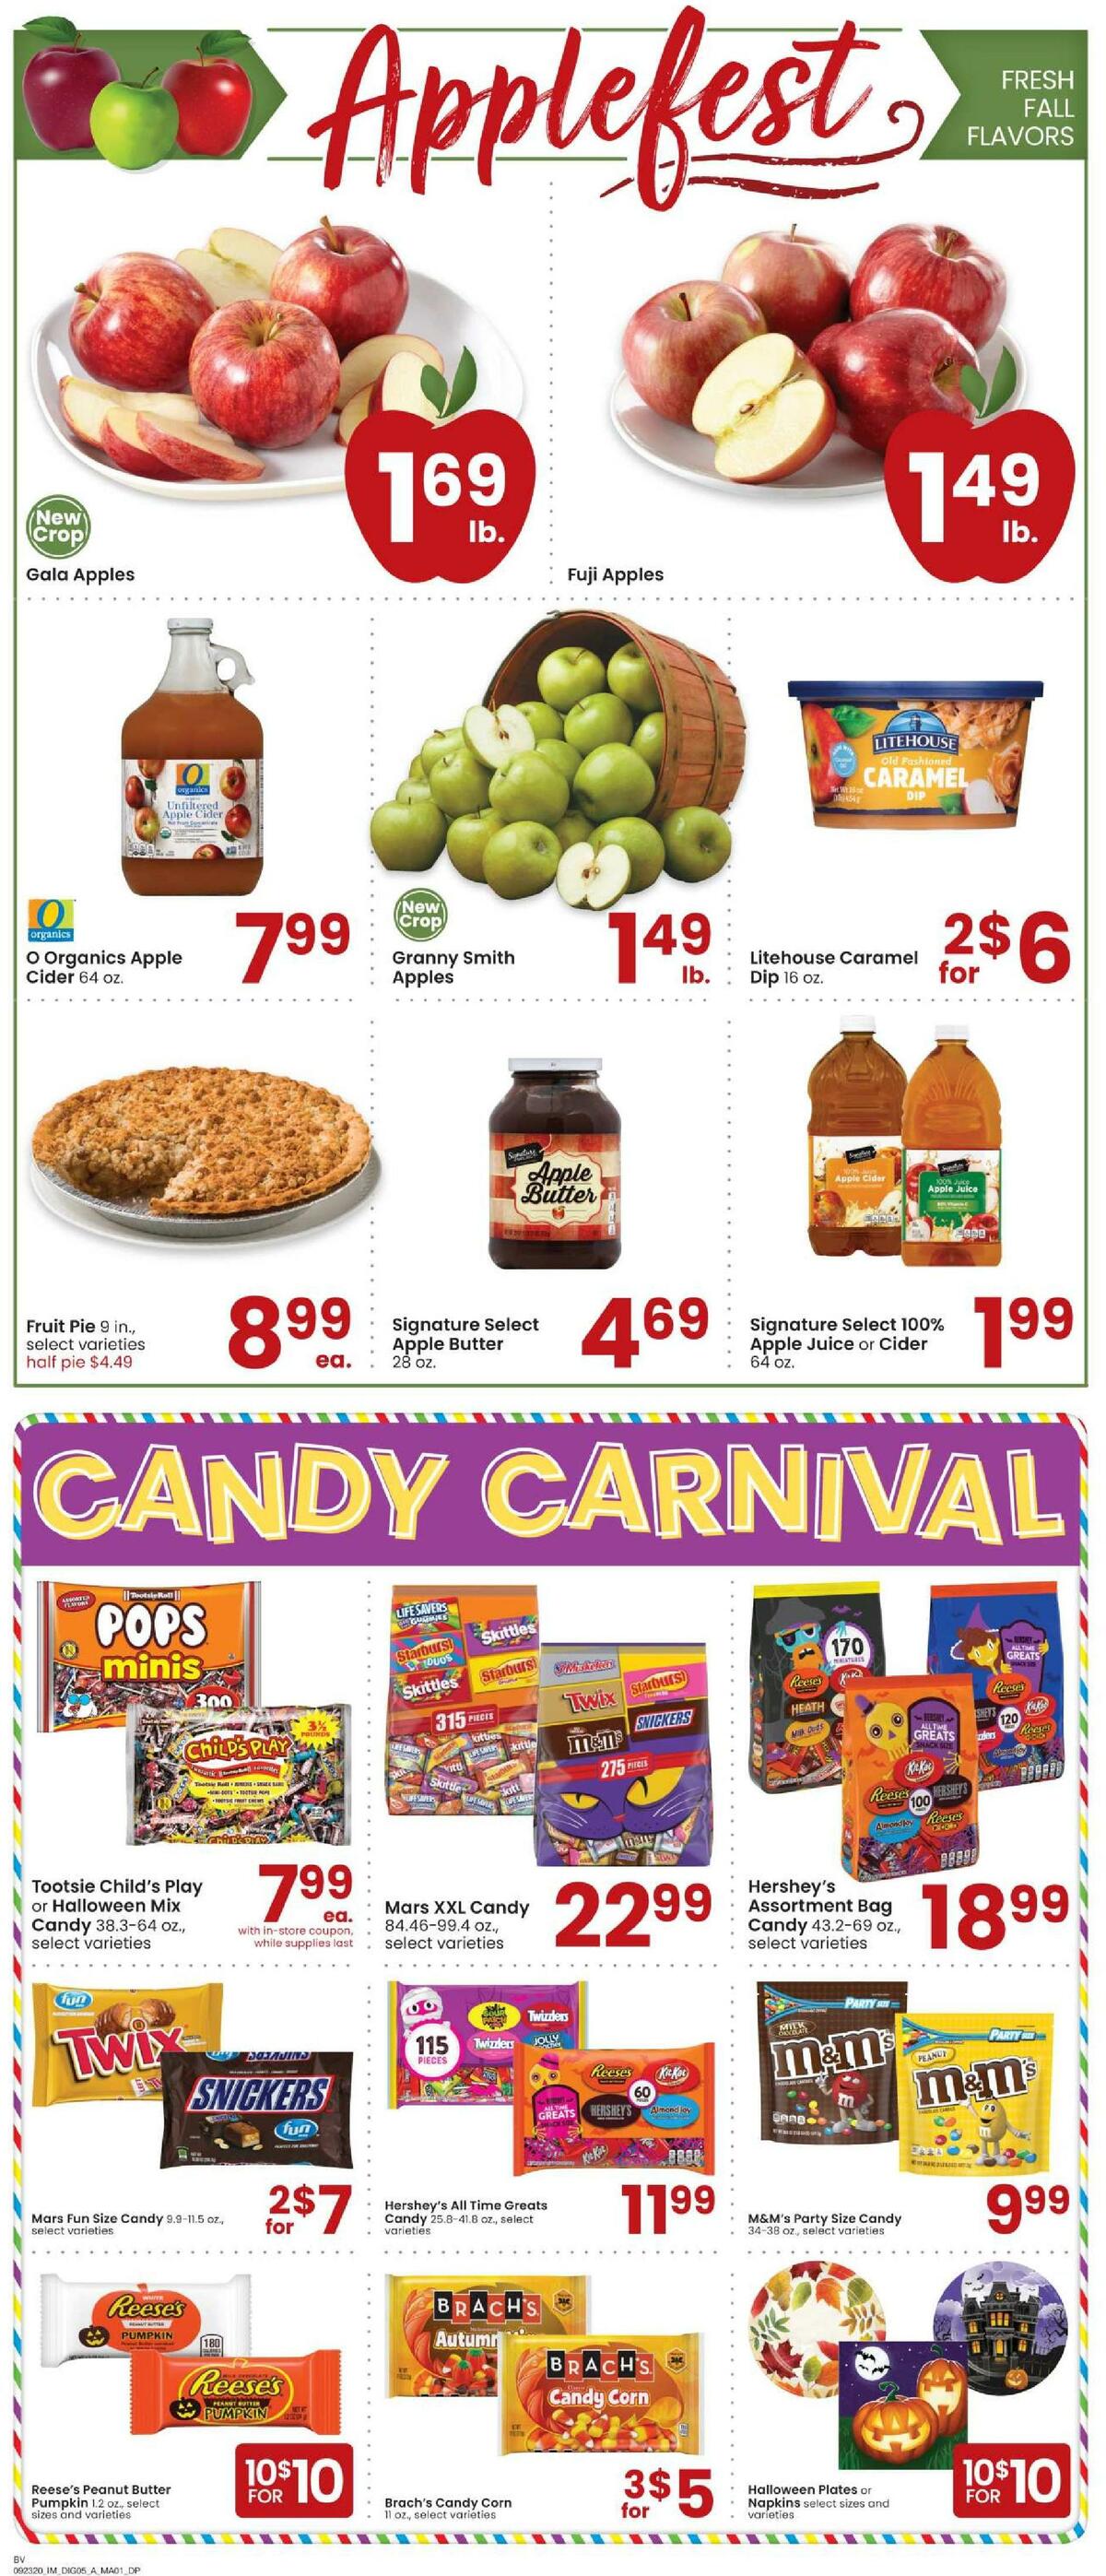 Albertsons Weekly Ad from September 23